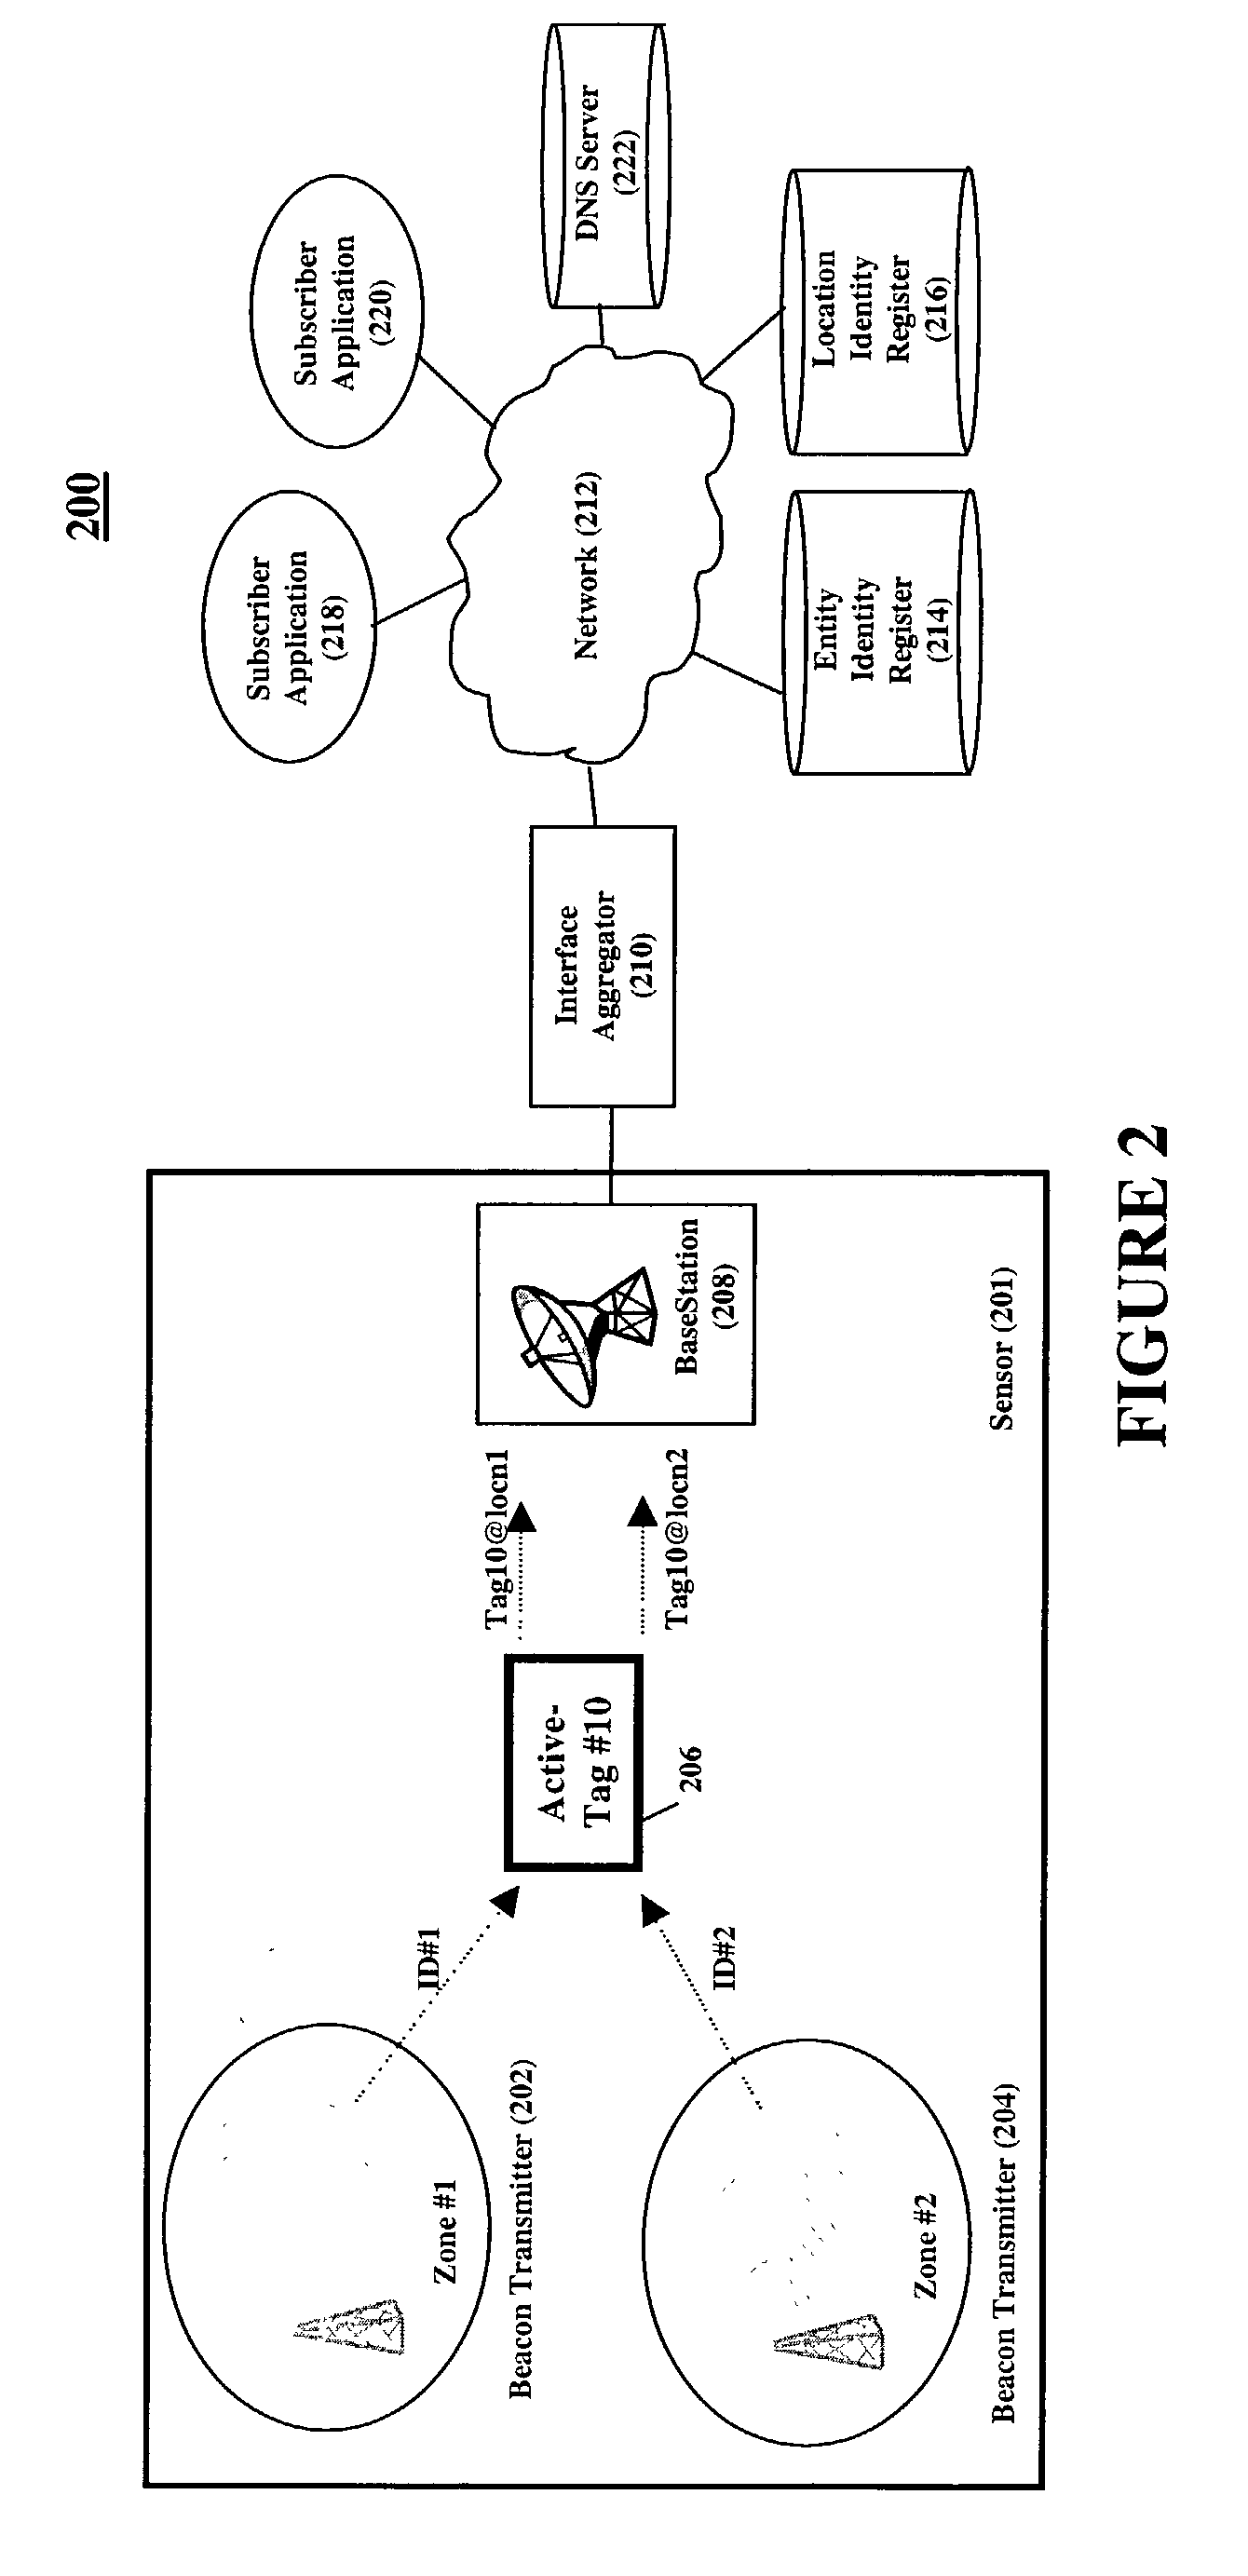 Location aware services infrastructure